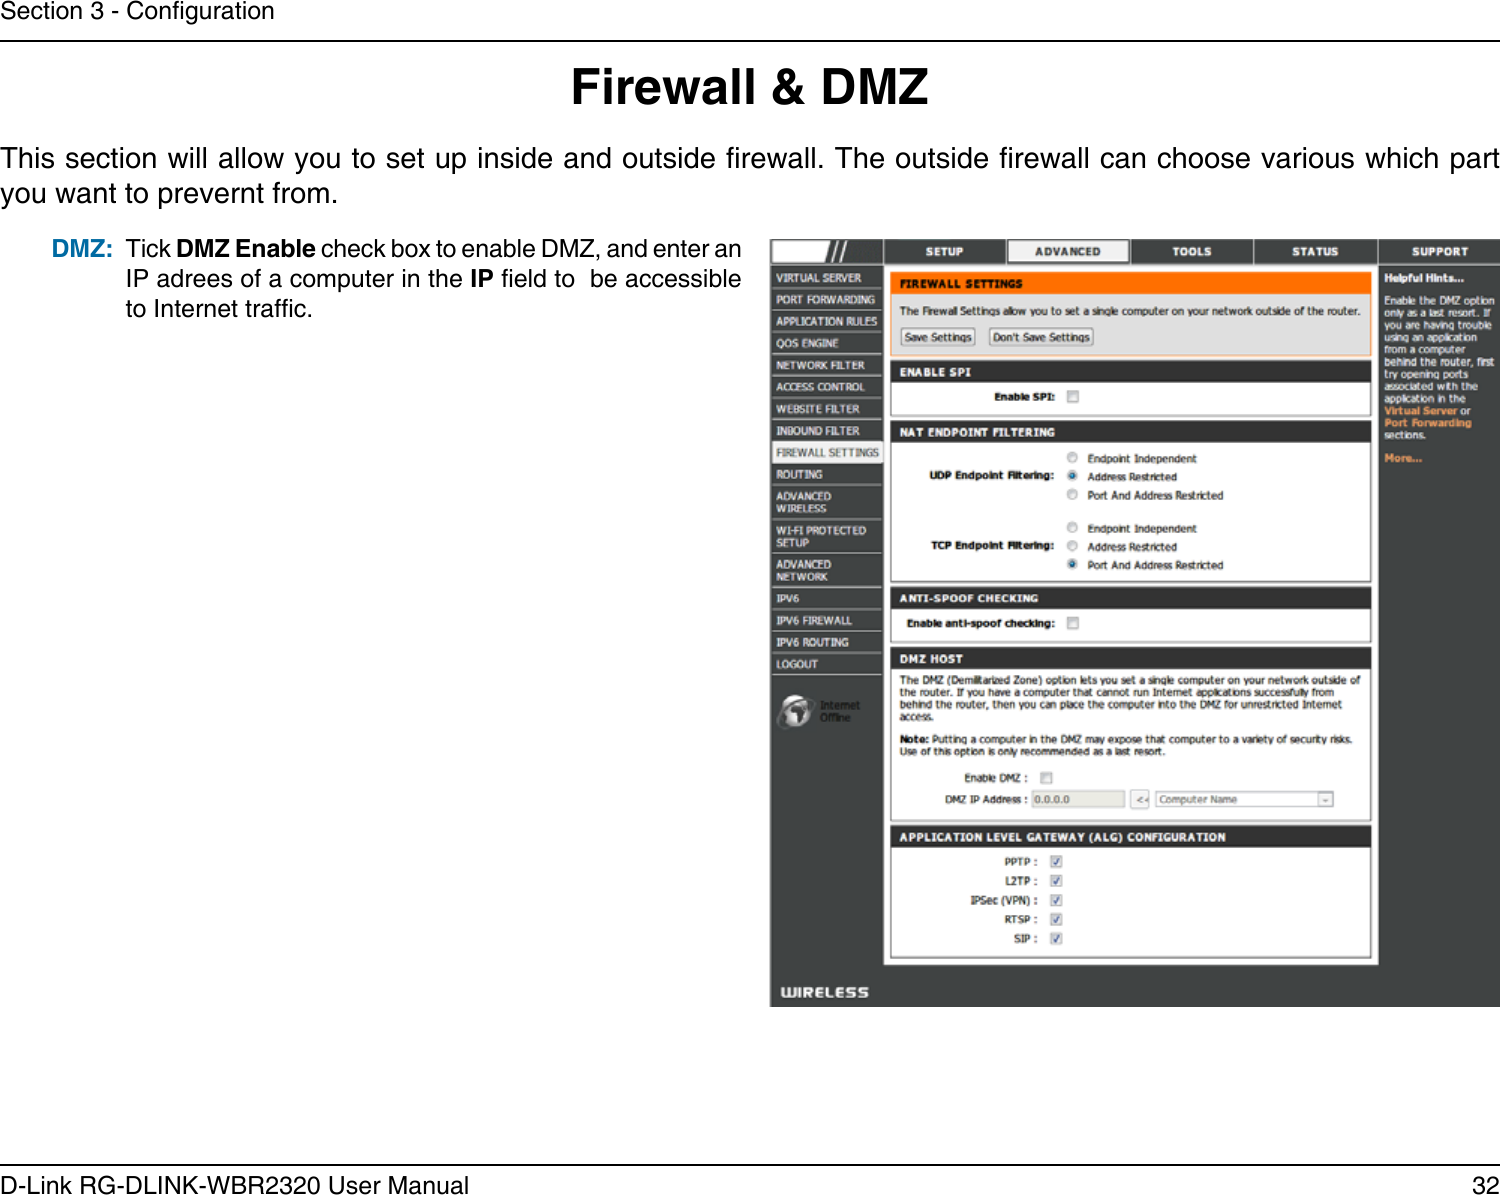 32D-Link RG-DLINK-WBR2320 User ManualSection 3 - CongurationFirewall &amp; DMZThis section will allow you to set up inside and outside rewall. The outside rewall can choose various which part you want to prevernt from.Tick DMZ Enable check box to enable DMZ, and enter an IP adrees of a computer in the IP eld to  be accessible to Internet trafc.DMZ: